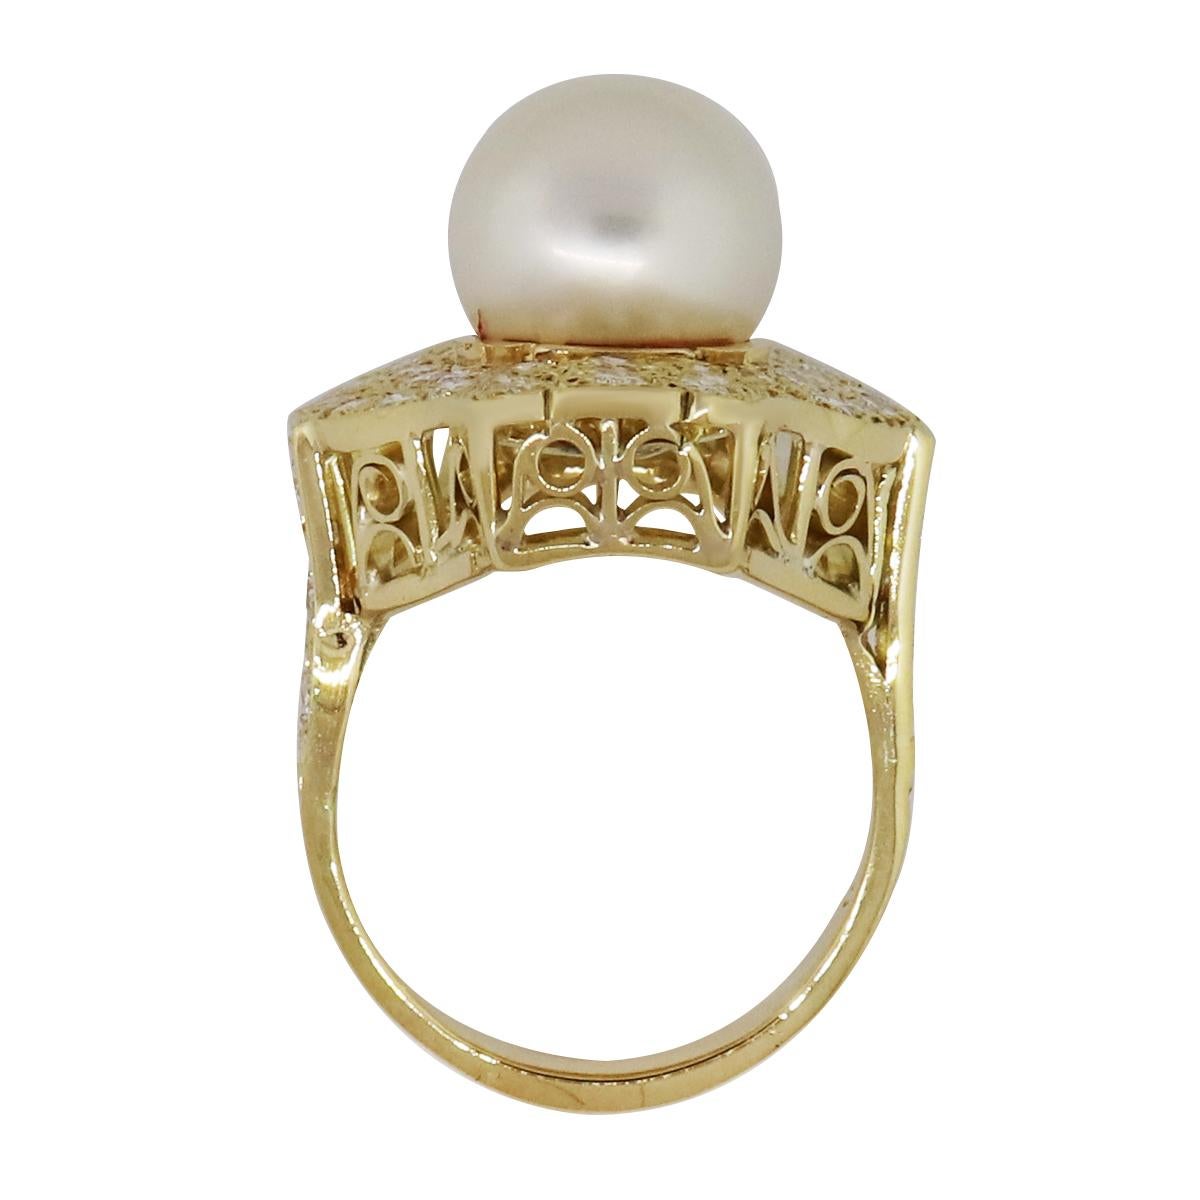 Material: 18k Yellow Gold 
Diamond Details: Approximately 1.40ctw round brilliant diamonds. Diamonds are G/H in color and SI in clarity.
Gemstone Details: Pearl in center measures 11.4mm
Ring Size: 8
Total Weight: 14.6g (9.4dwt)
Measurements: 0.80″